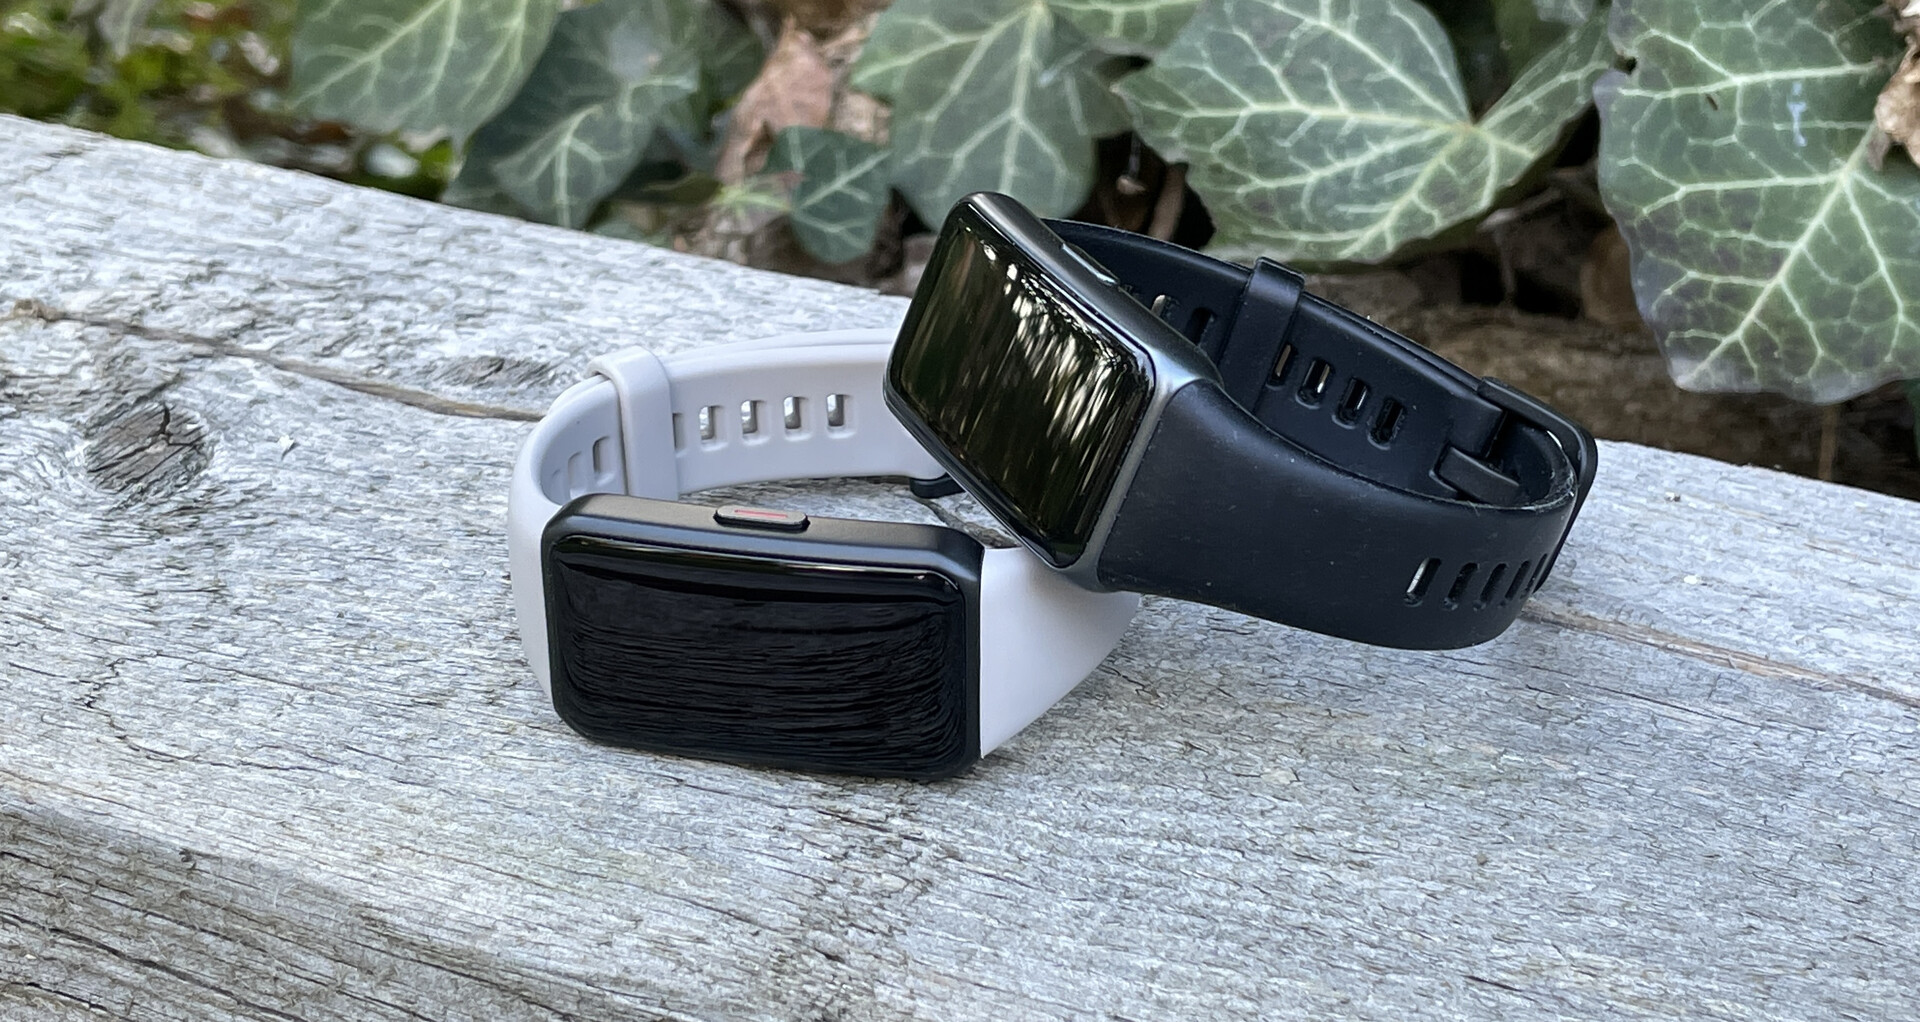 Difference between Honor Band 6 and Huawei Band 6